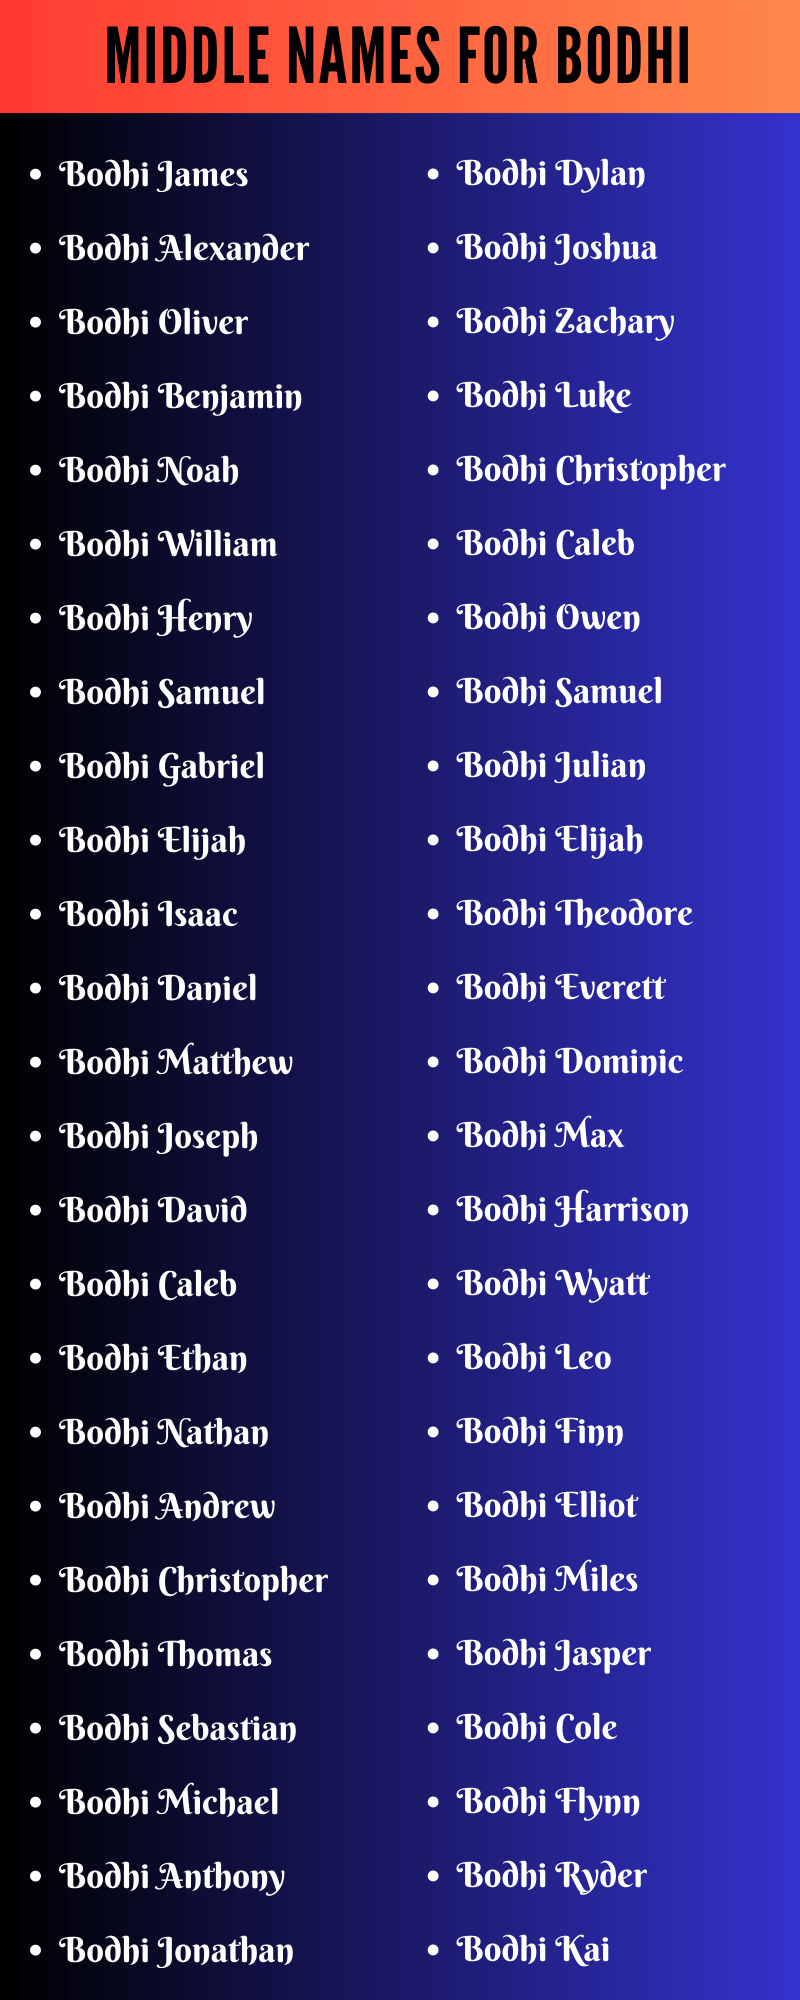 Middle Names For Bodhi